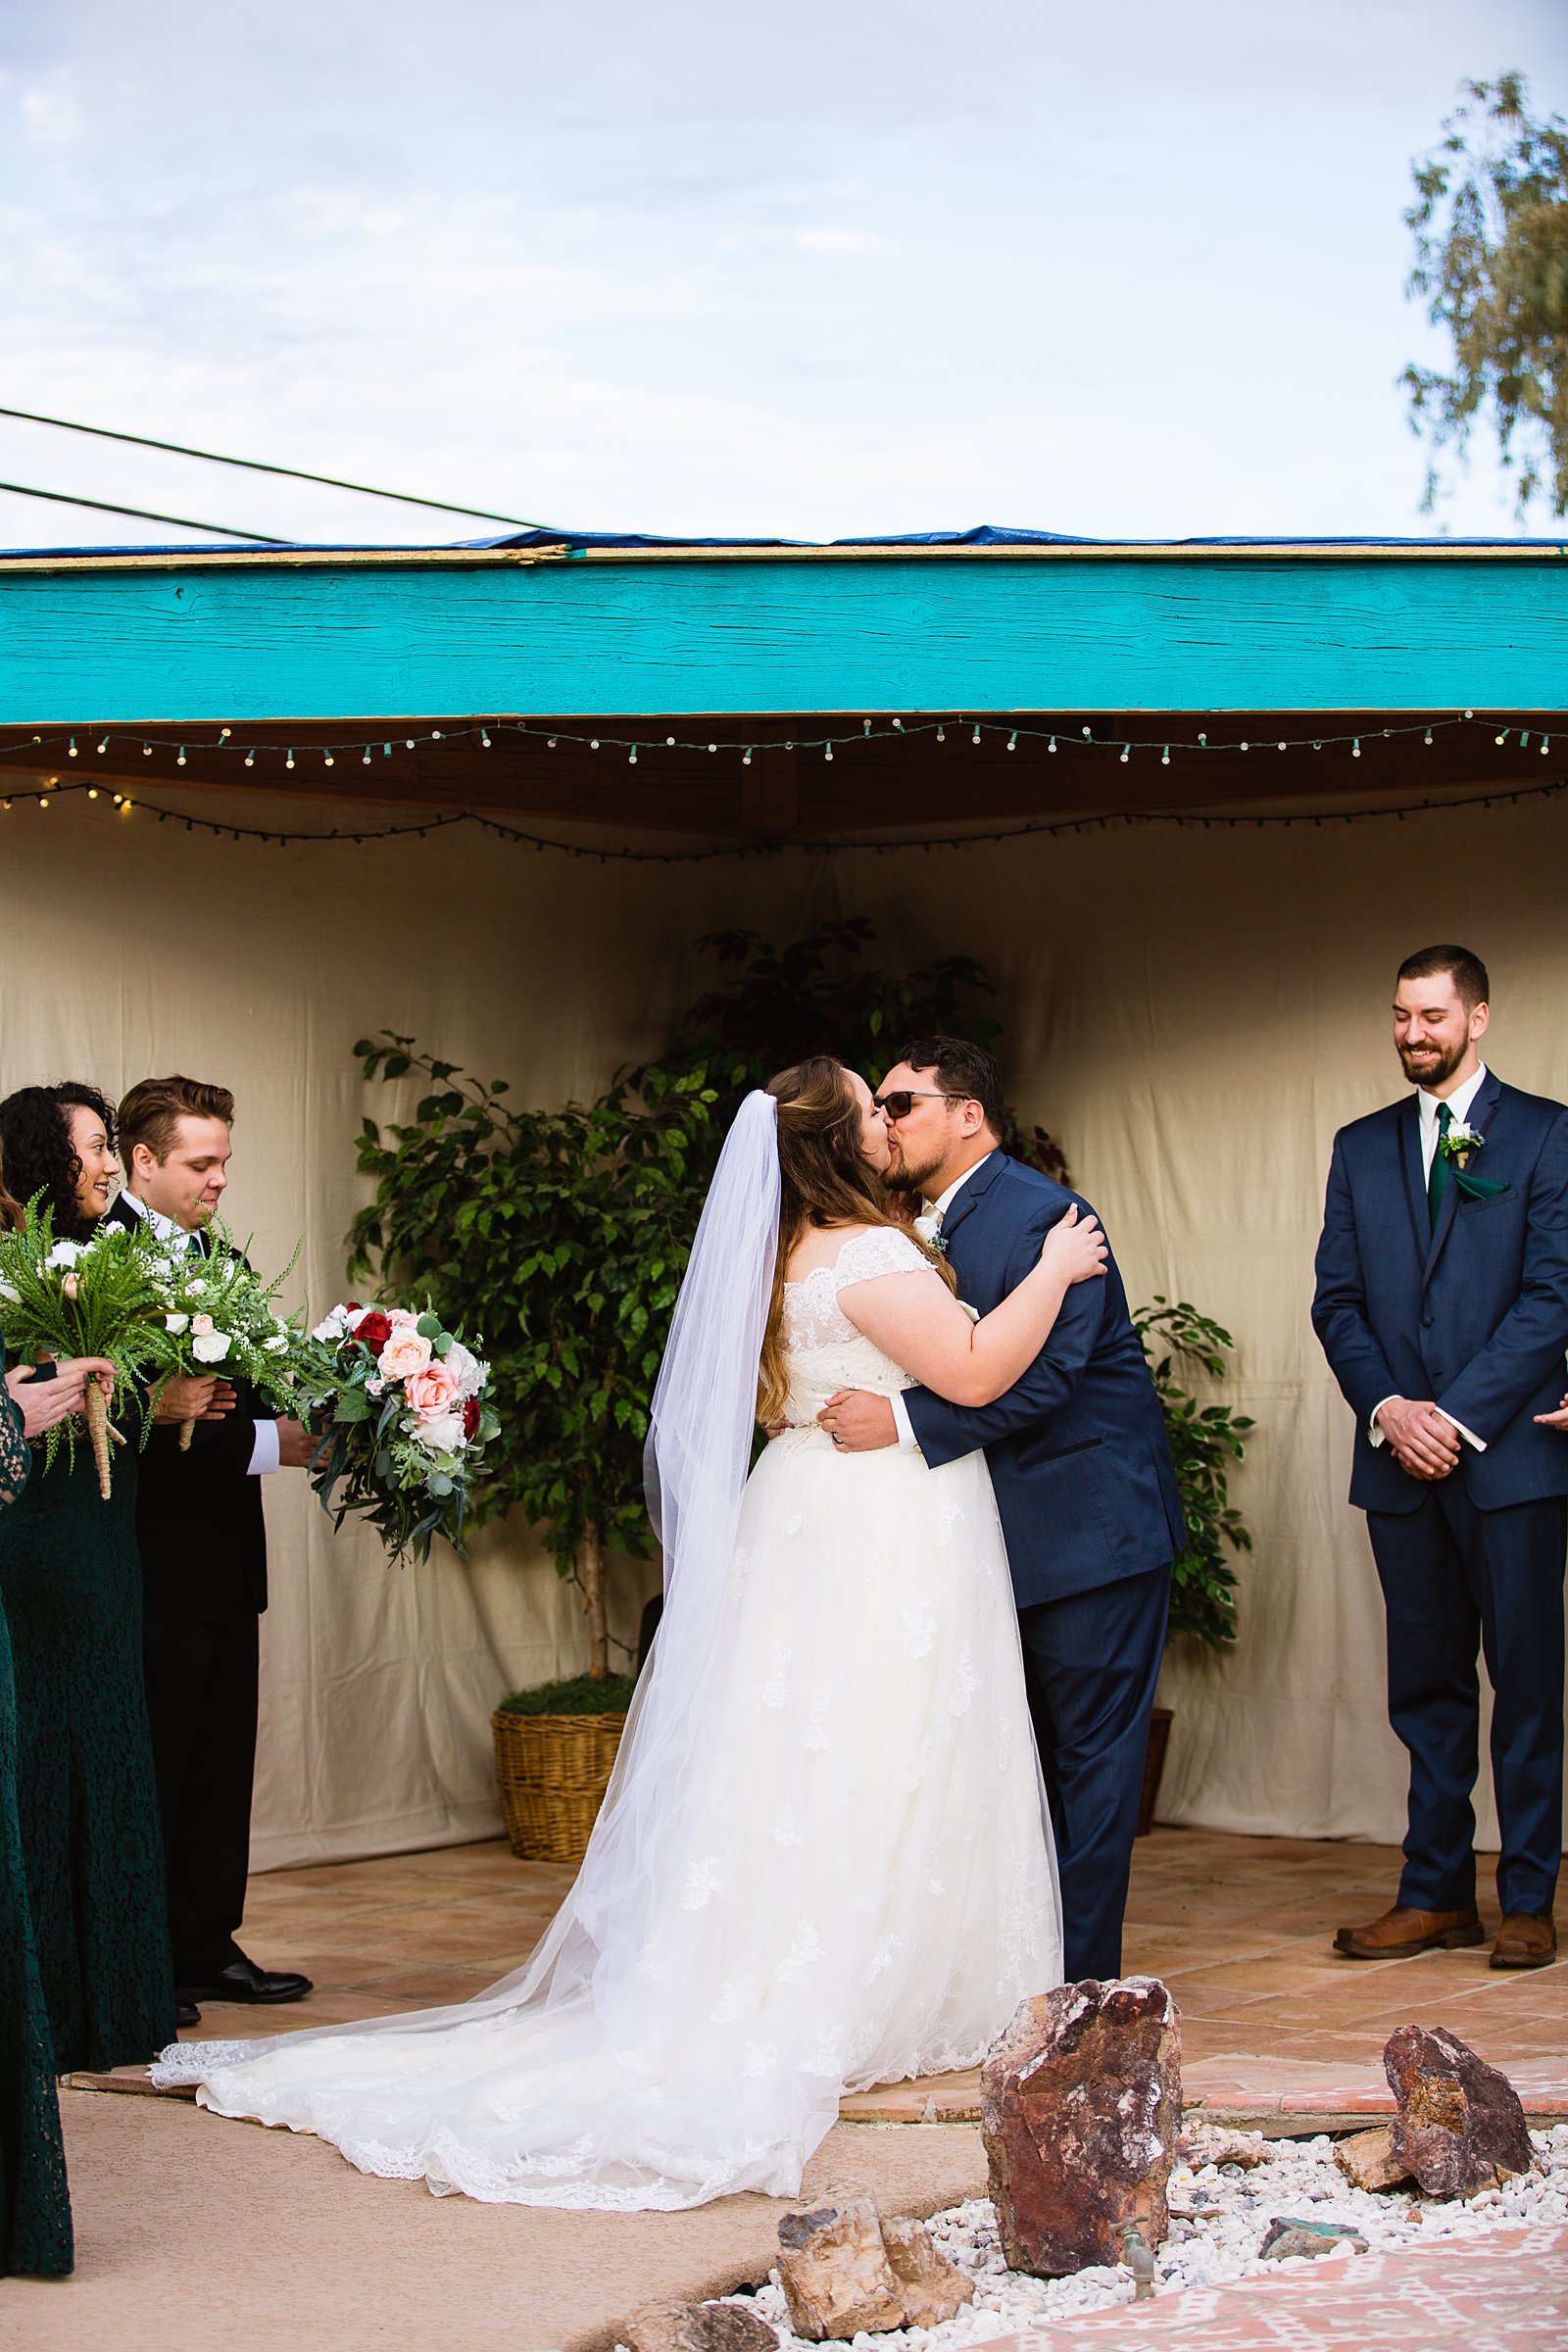 Bride and Groom share their first kiss during their wedding ceremony at Backyard by Arizona wedding photographer PMA Photography.